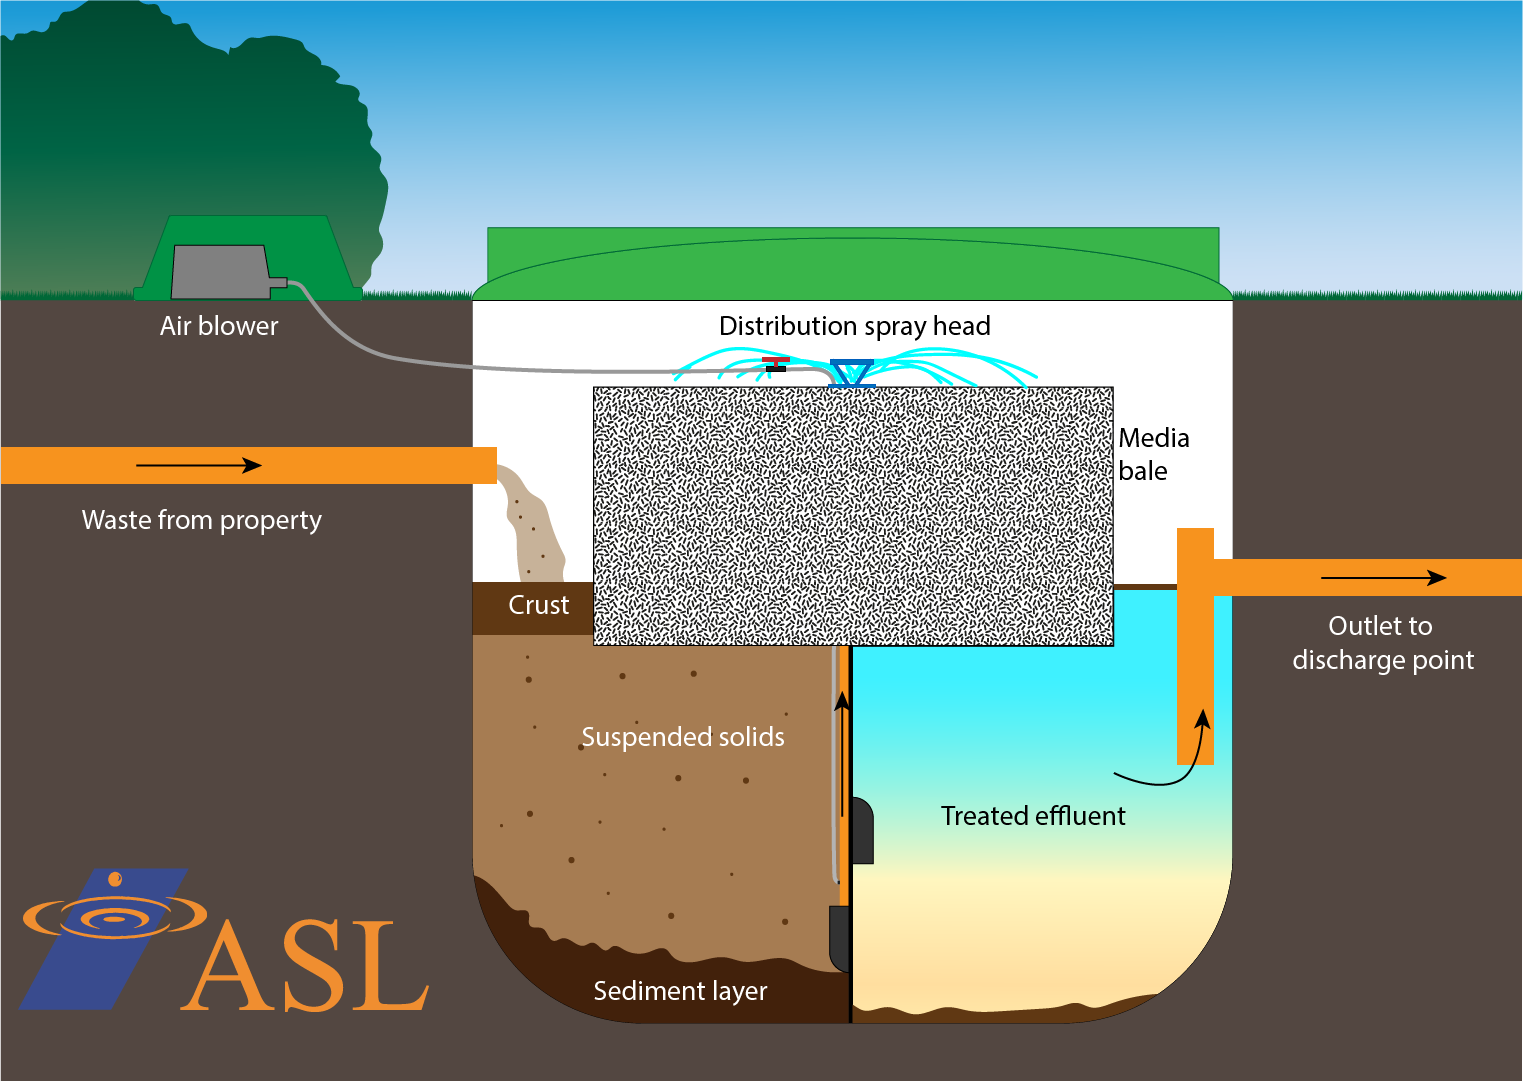 ASL Limited have created this diagram to show you what a treatment plant consists of under the surface. This diagram uses a Klargester BioTech treatment plant as an example.